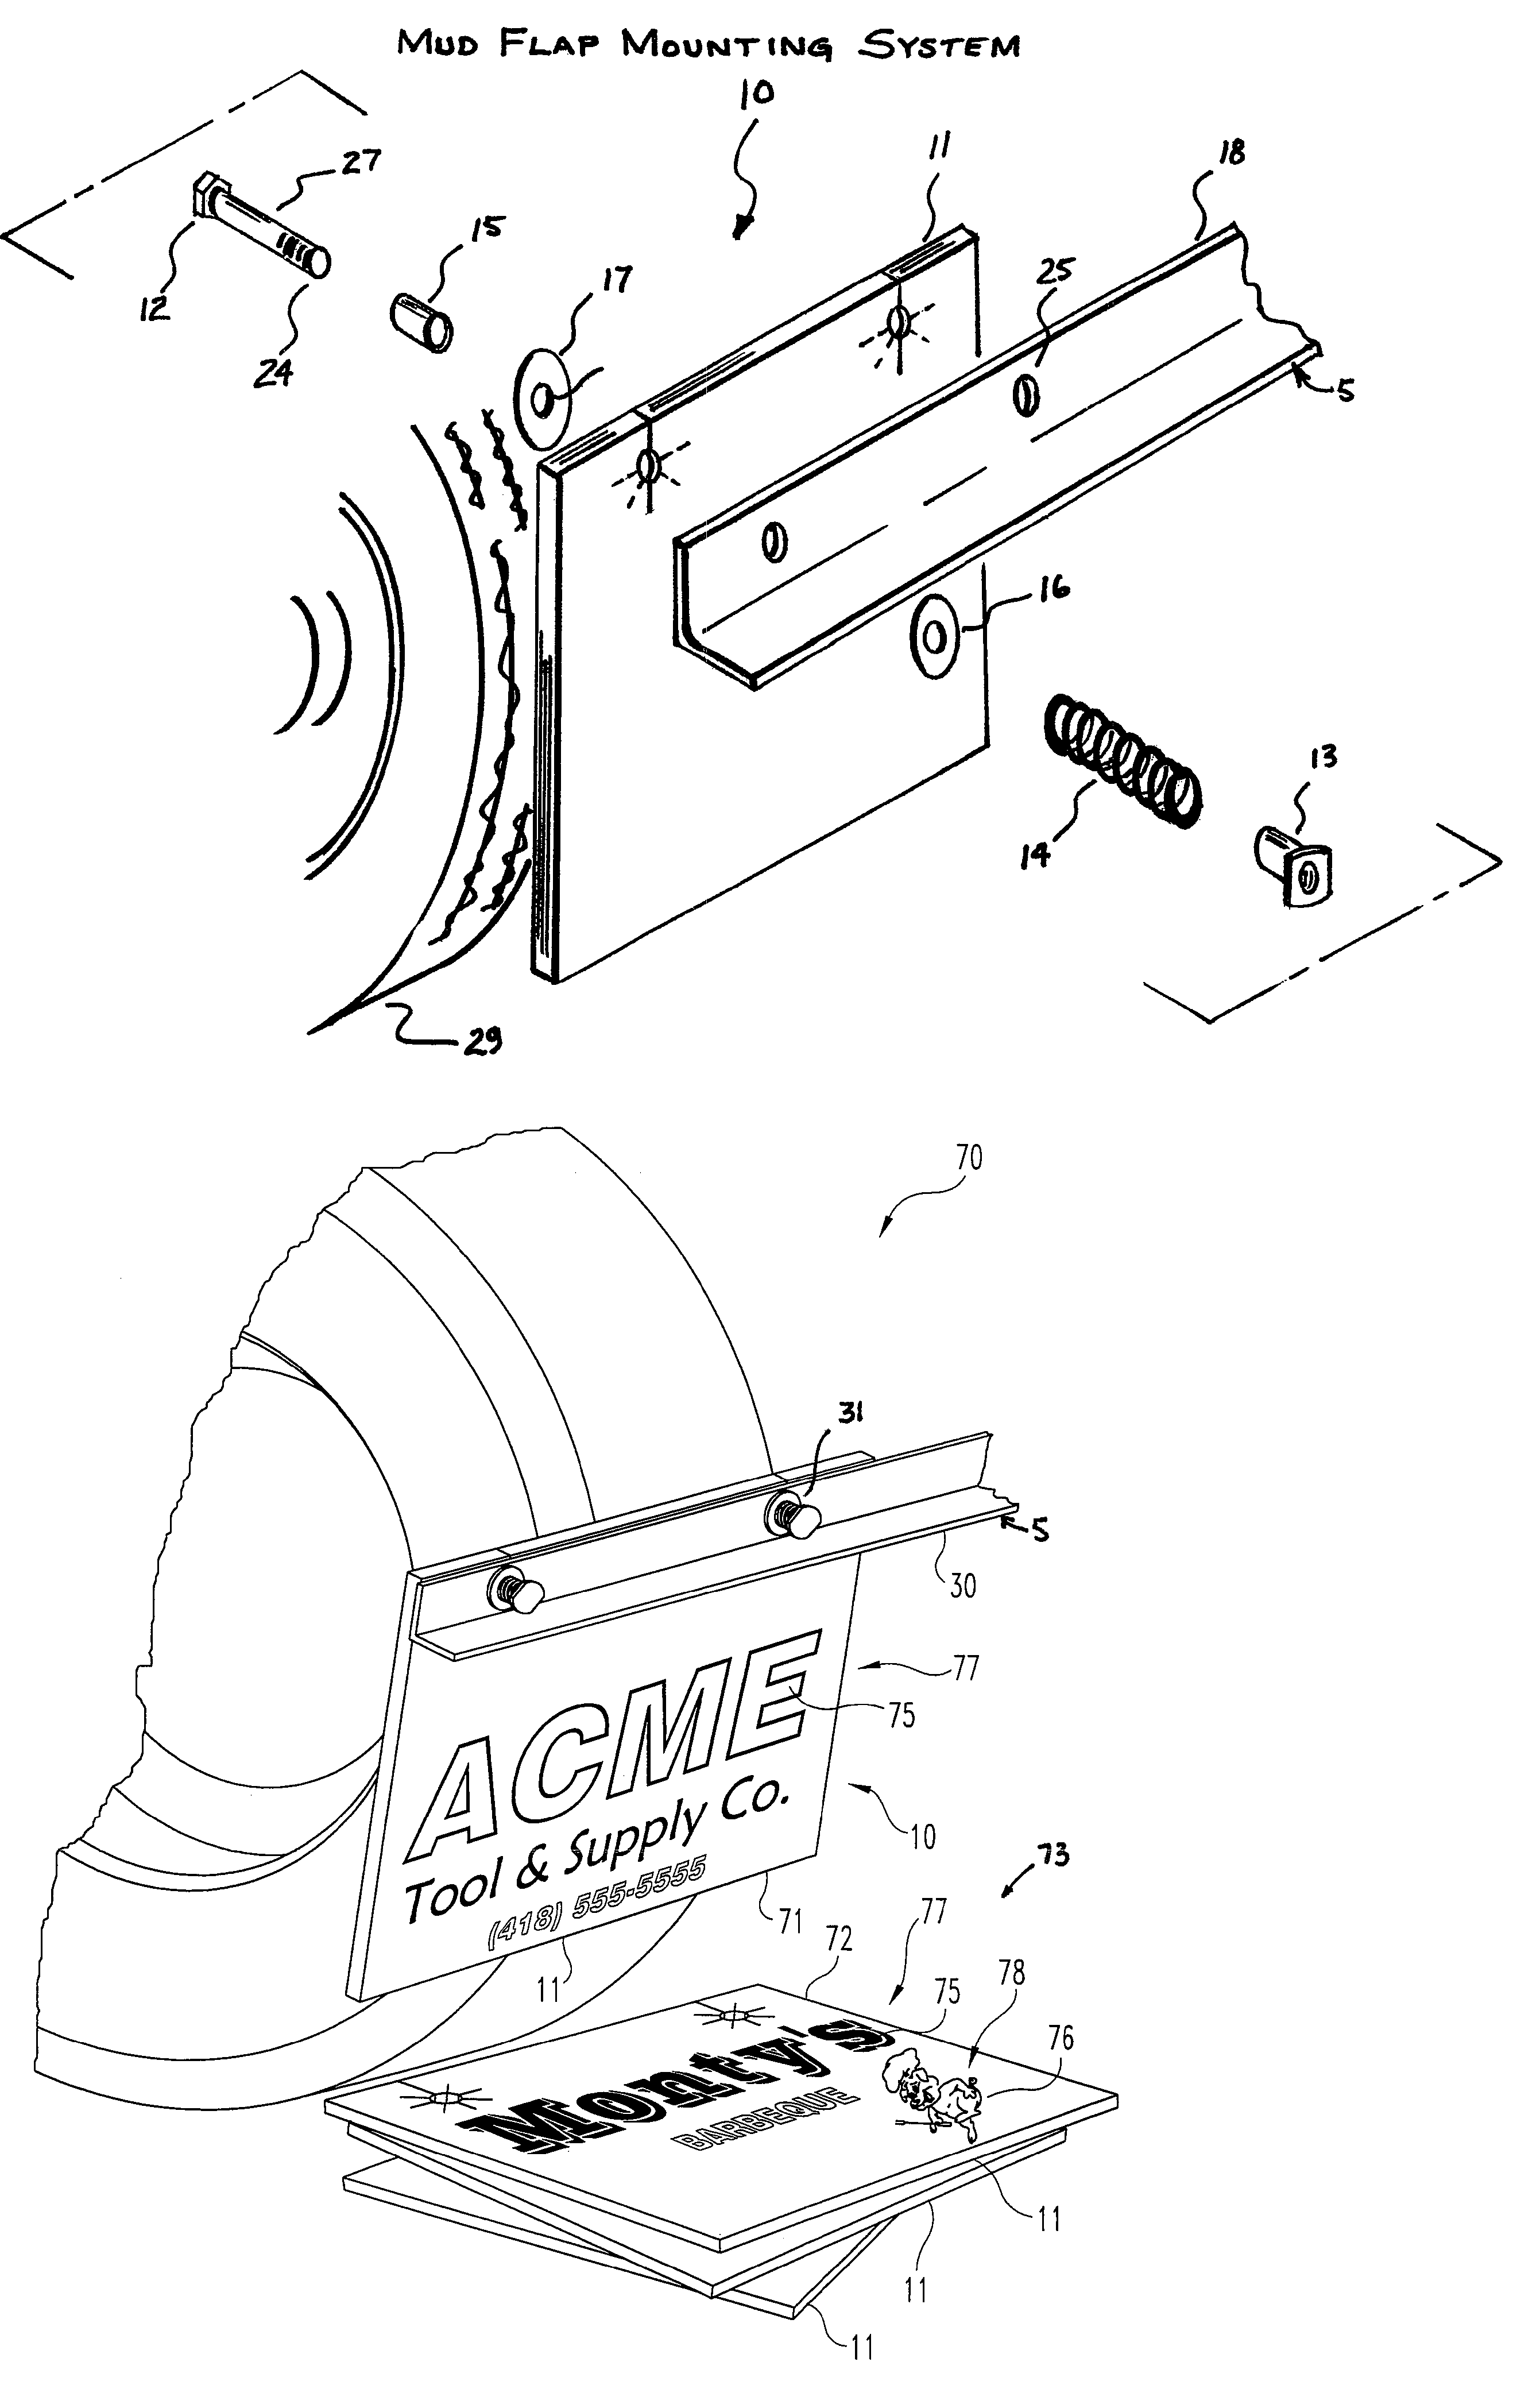 Apparatus and method for mounting mud flaps on a vehicle